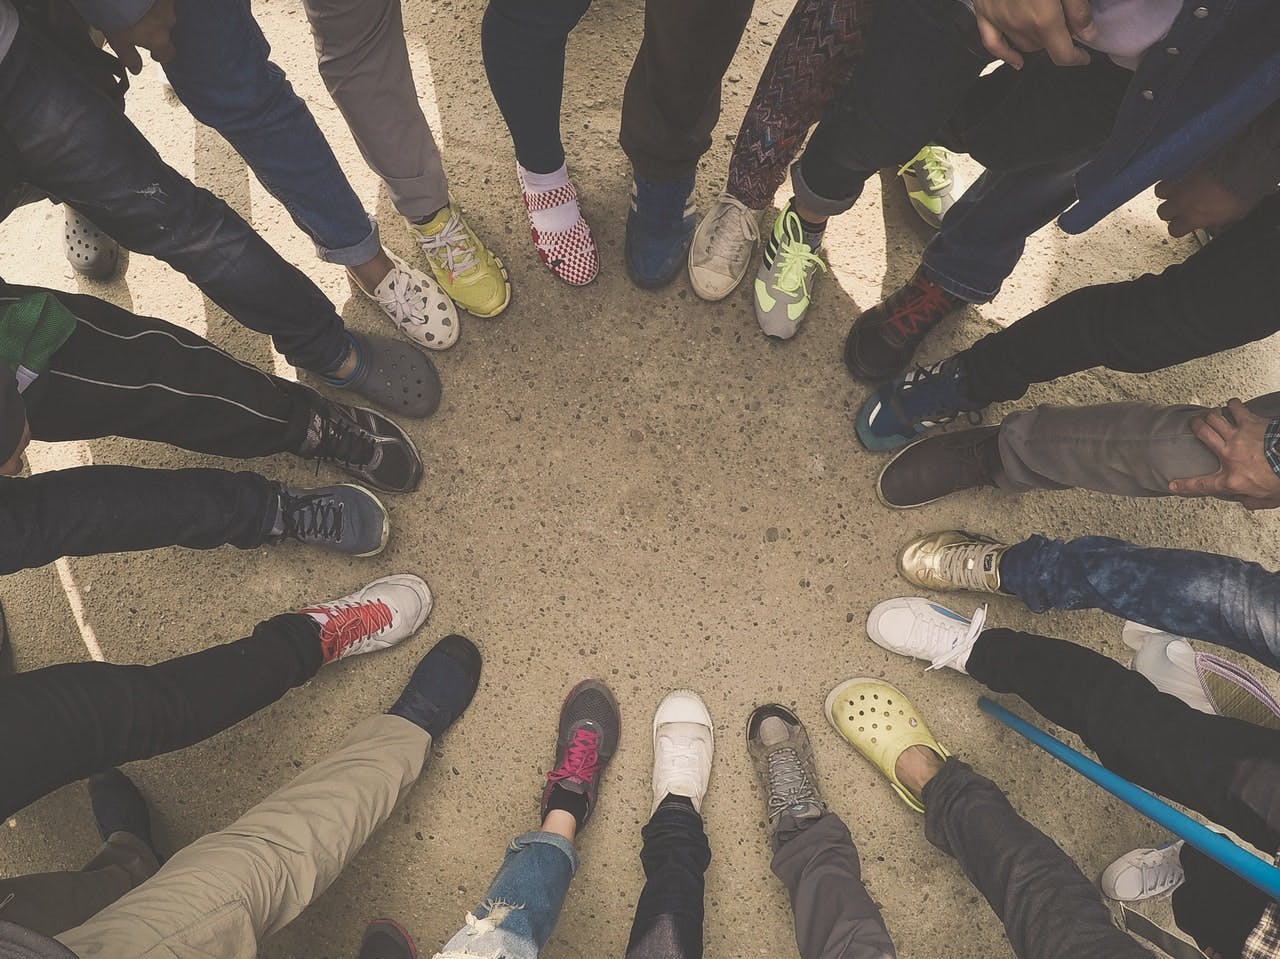 Feet in various shoes stand in a circle on a sandy ground, with visible legs suggesting a diverse group of people in a casual gathering.